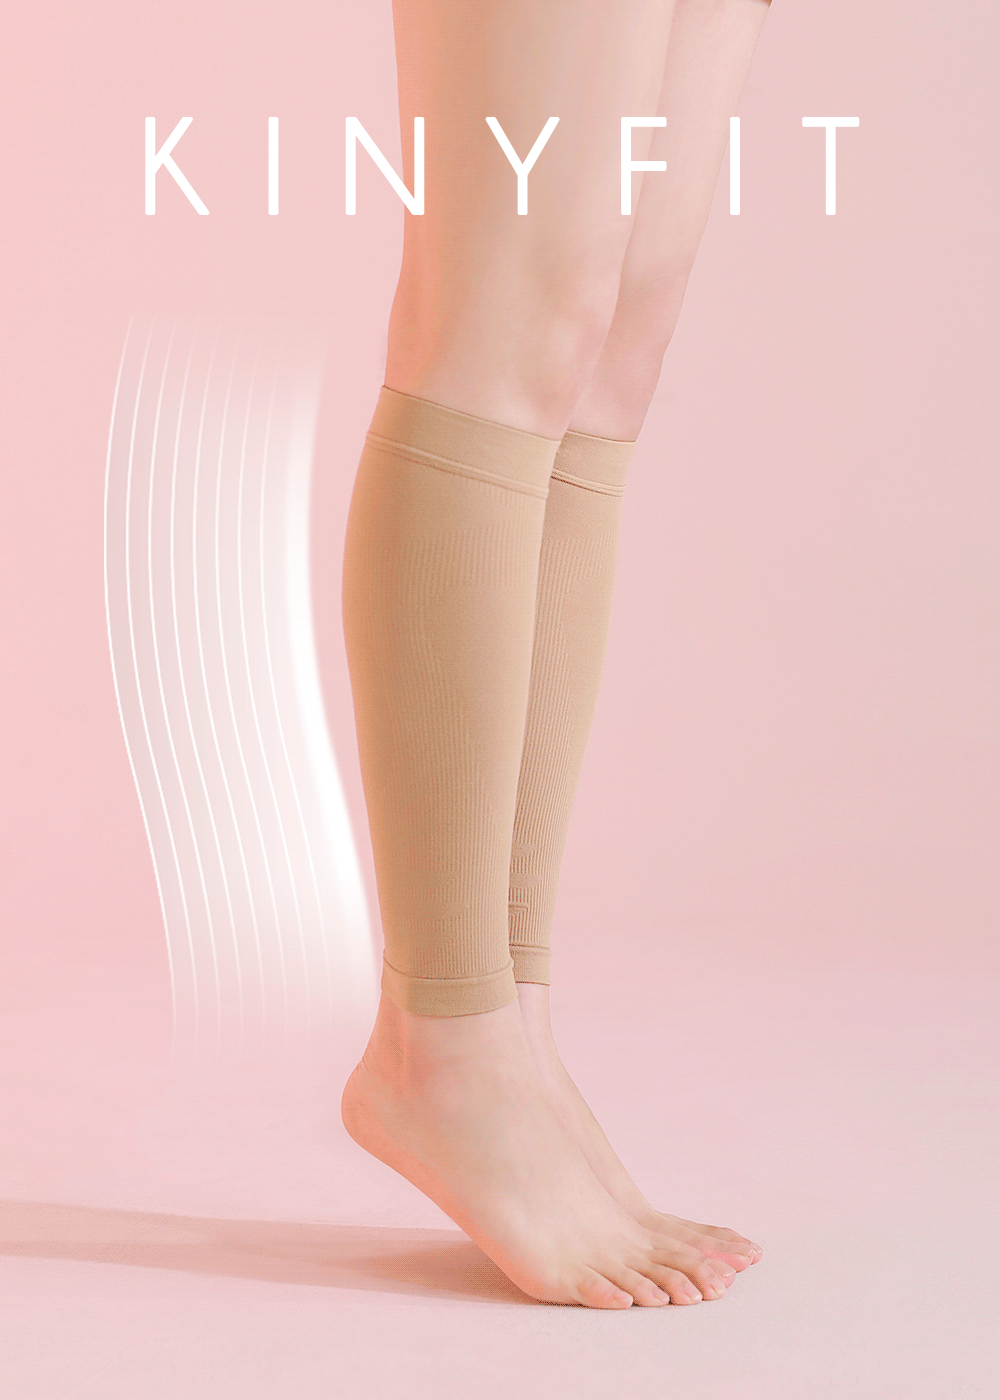 [Produced by Kinney] Kinney Fit Calf Pressure Stockings